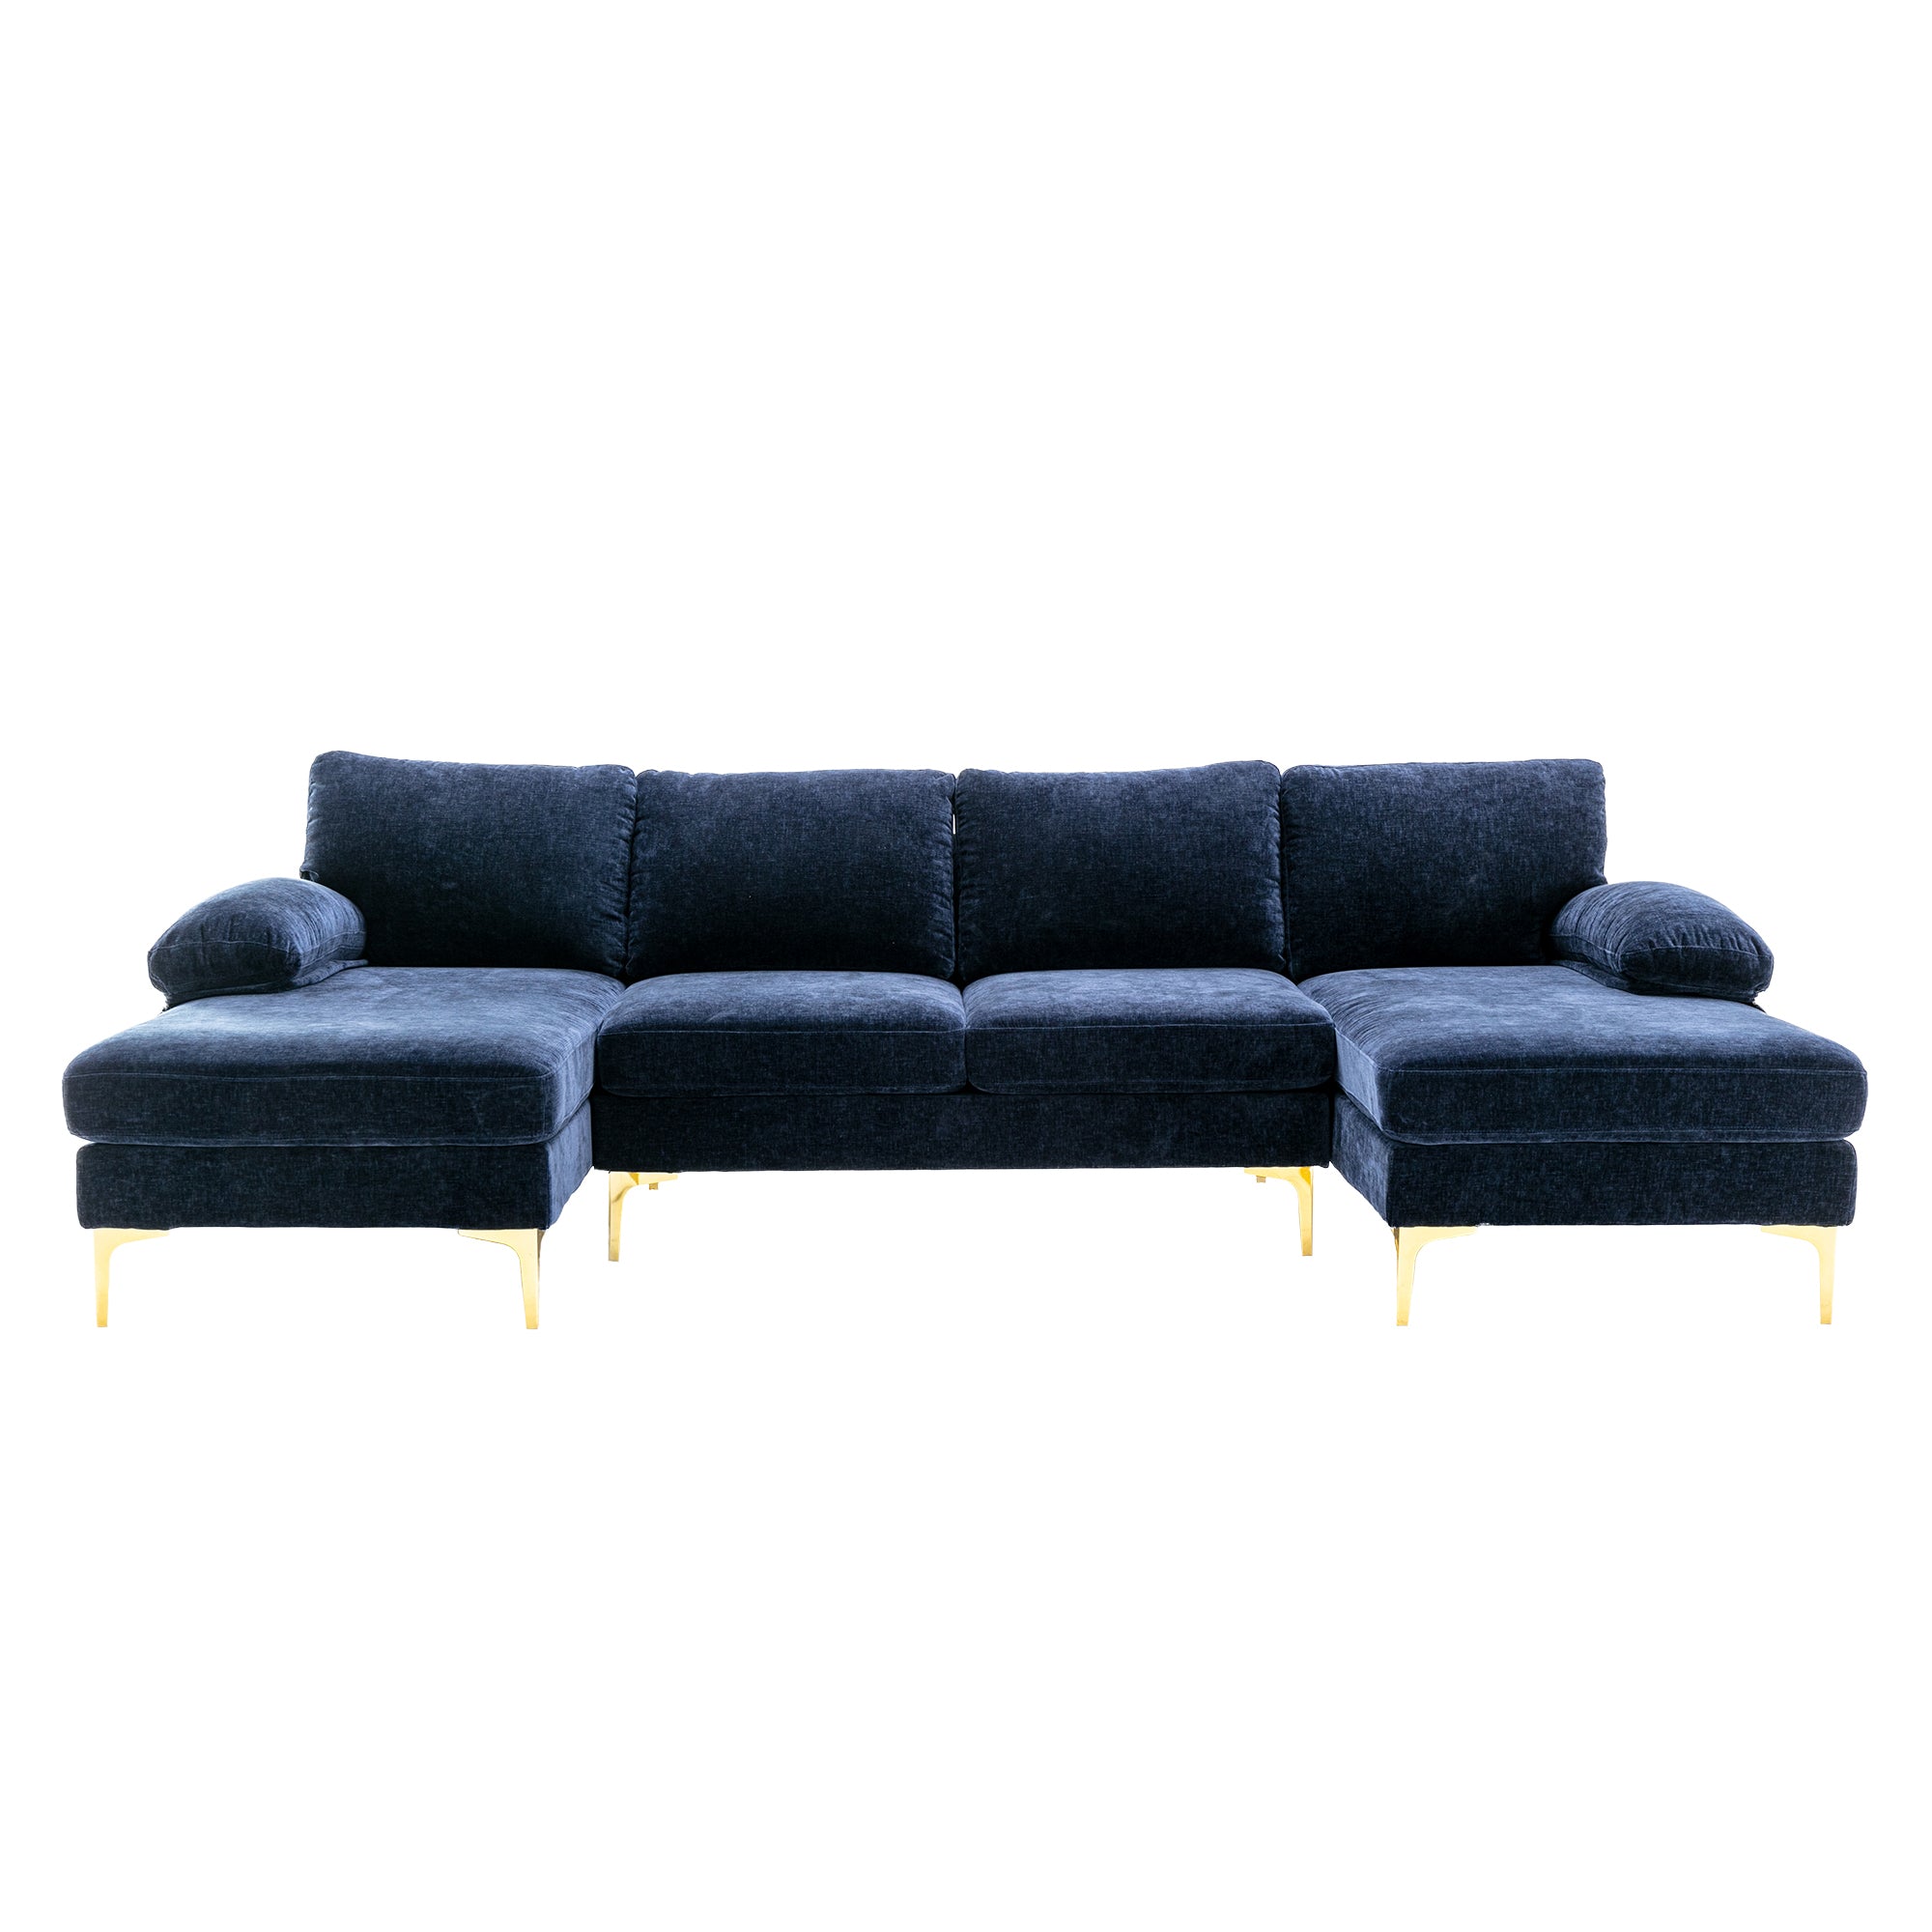 Living Room Sectional Sofa, Navy Blue